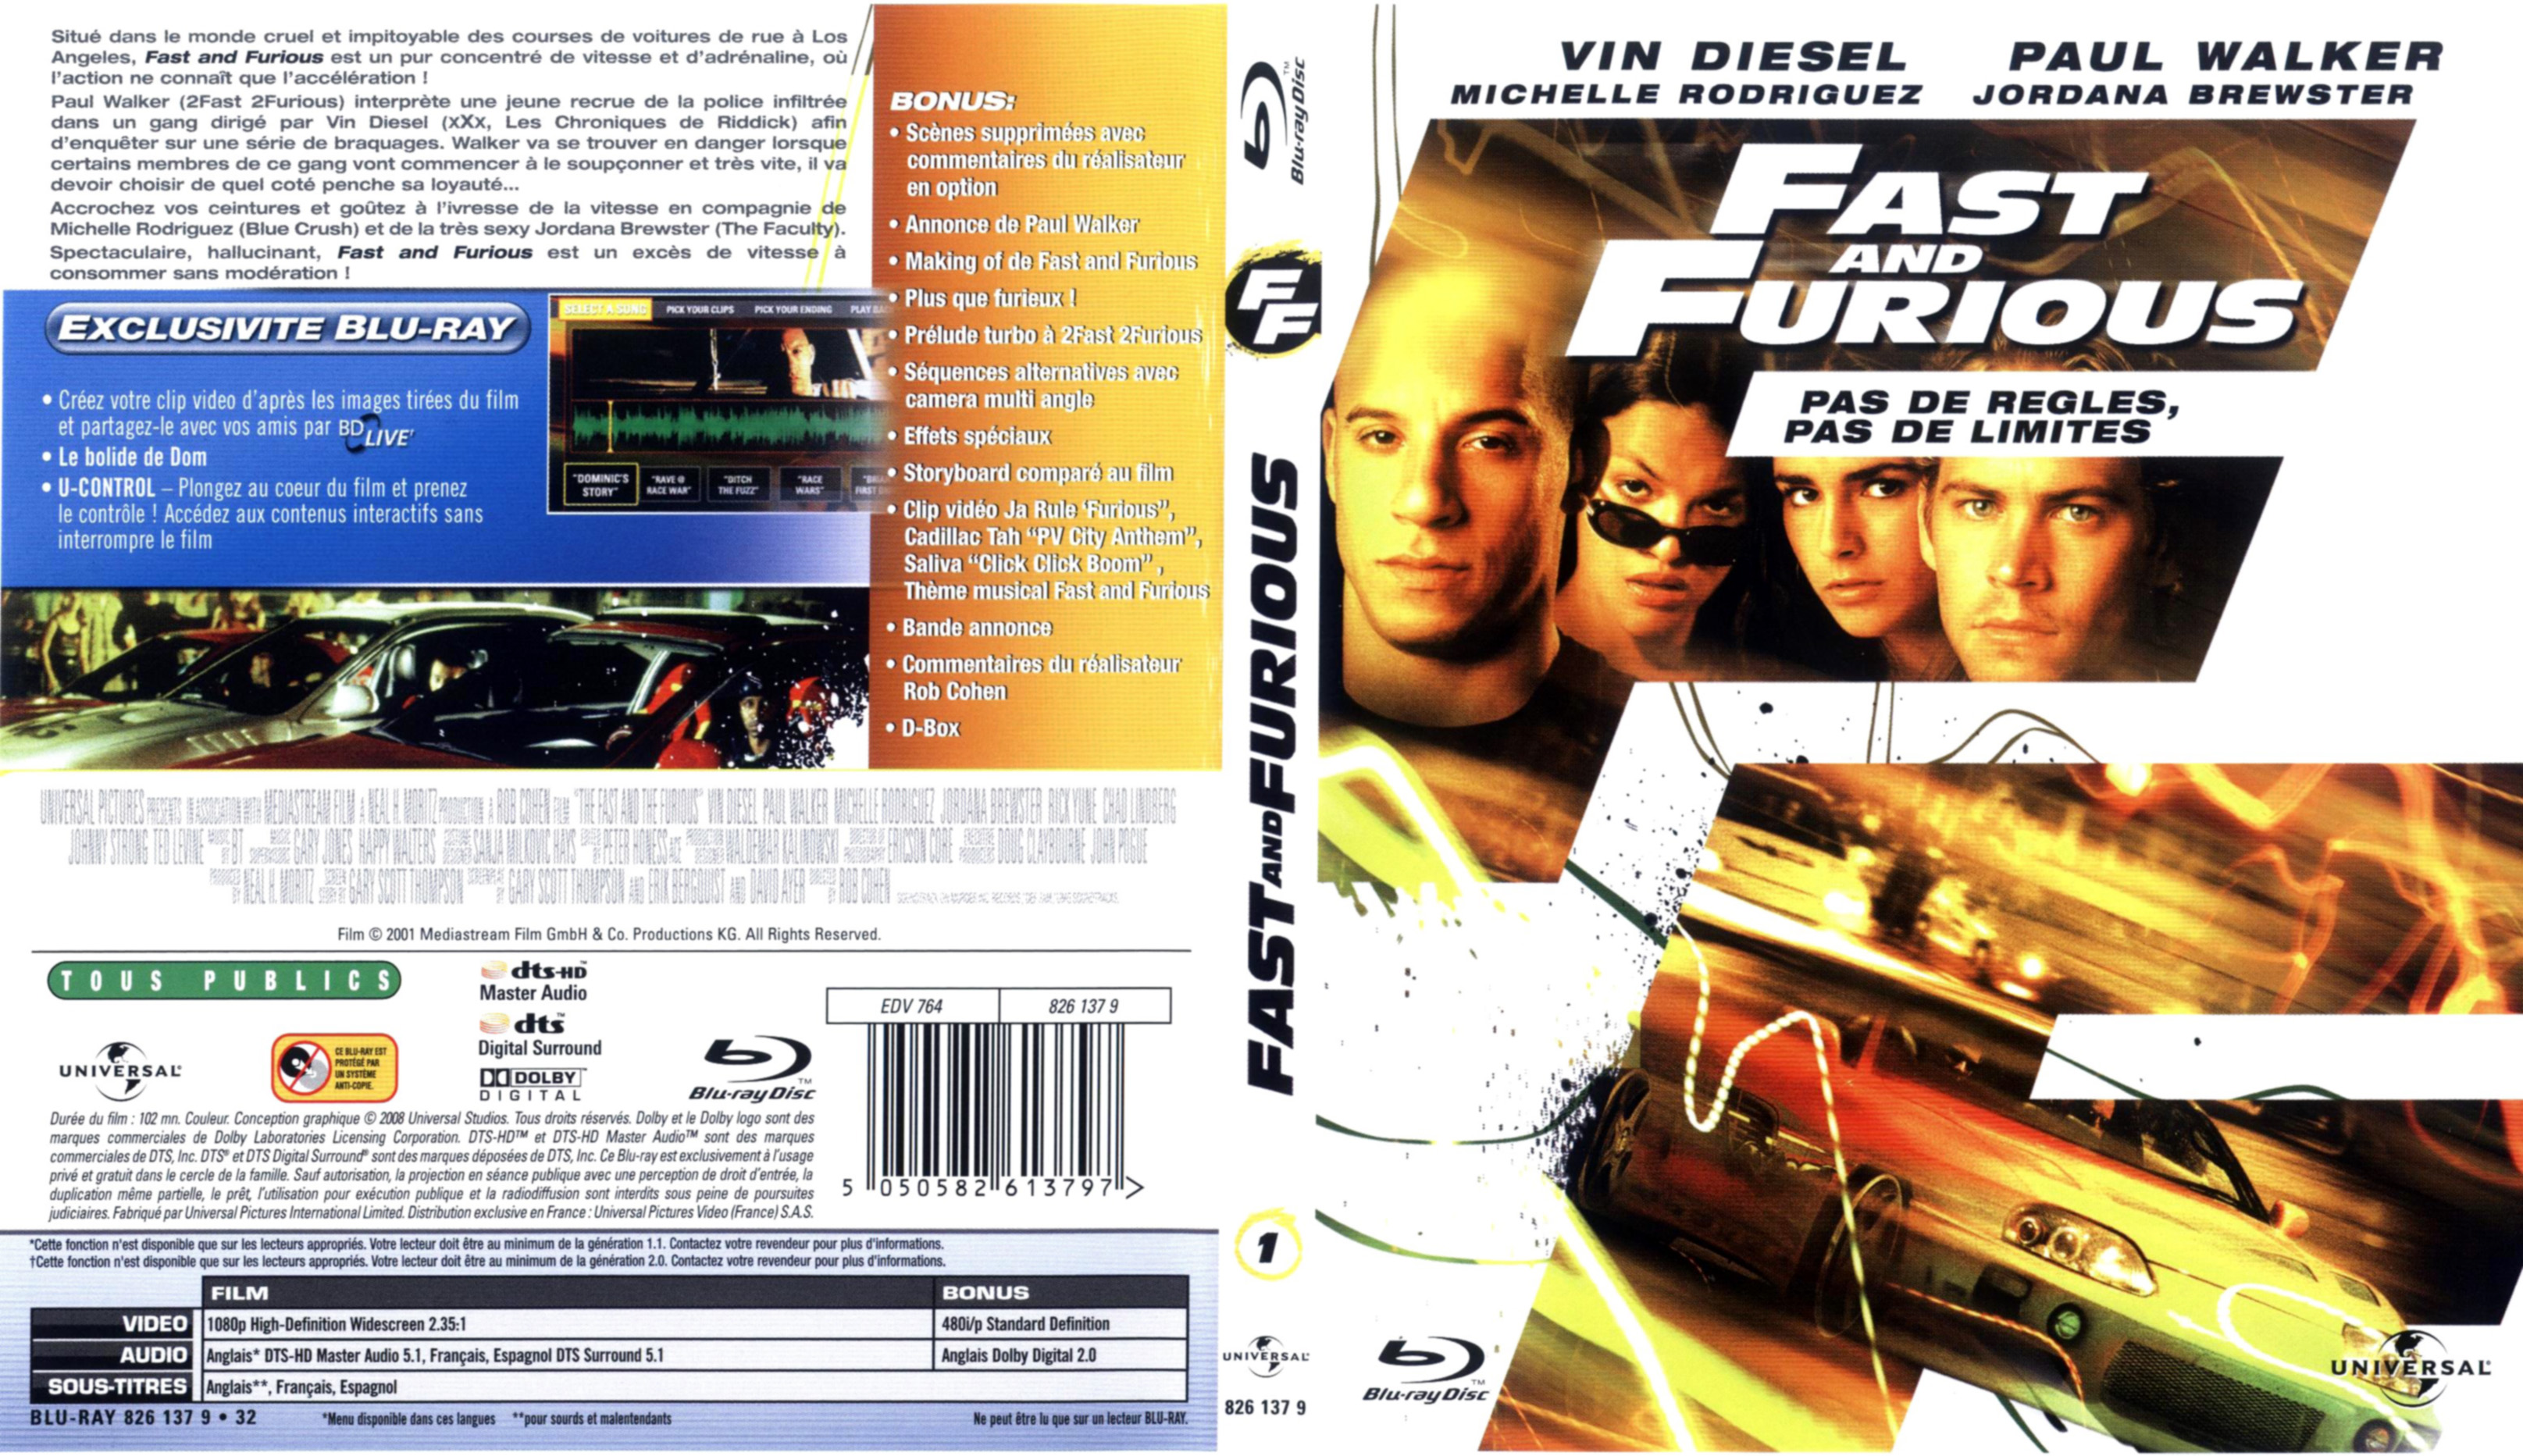 Jaquette DVD Fast and furious (BLU-RAY)